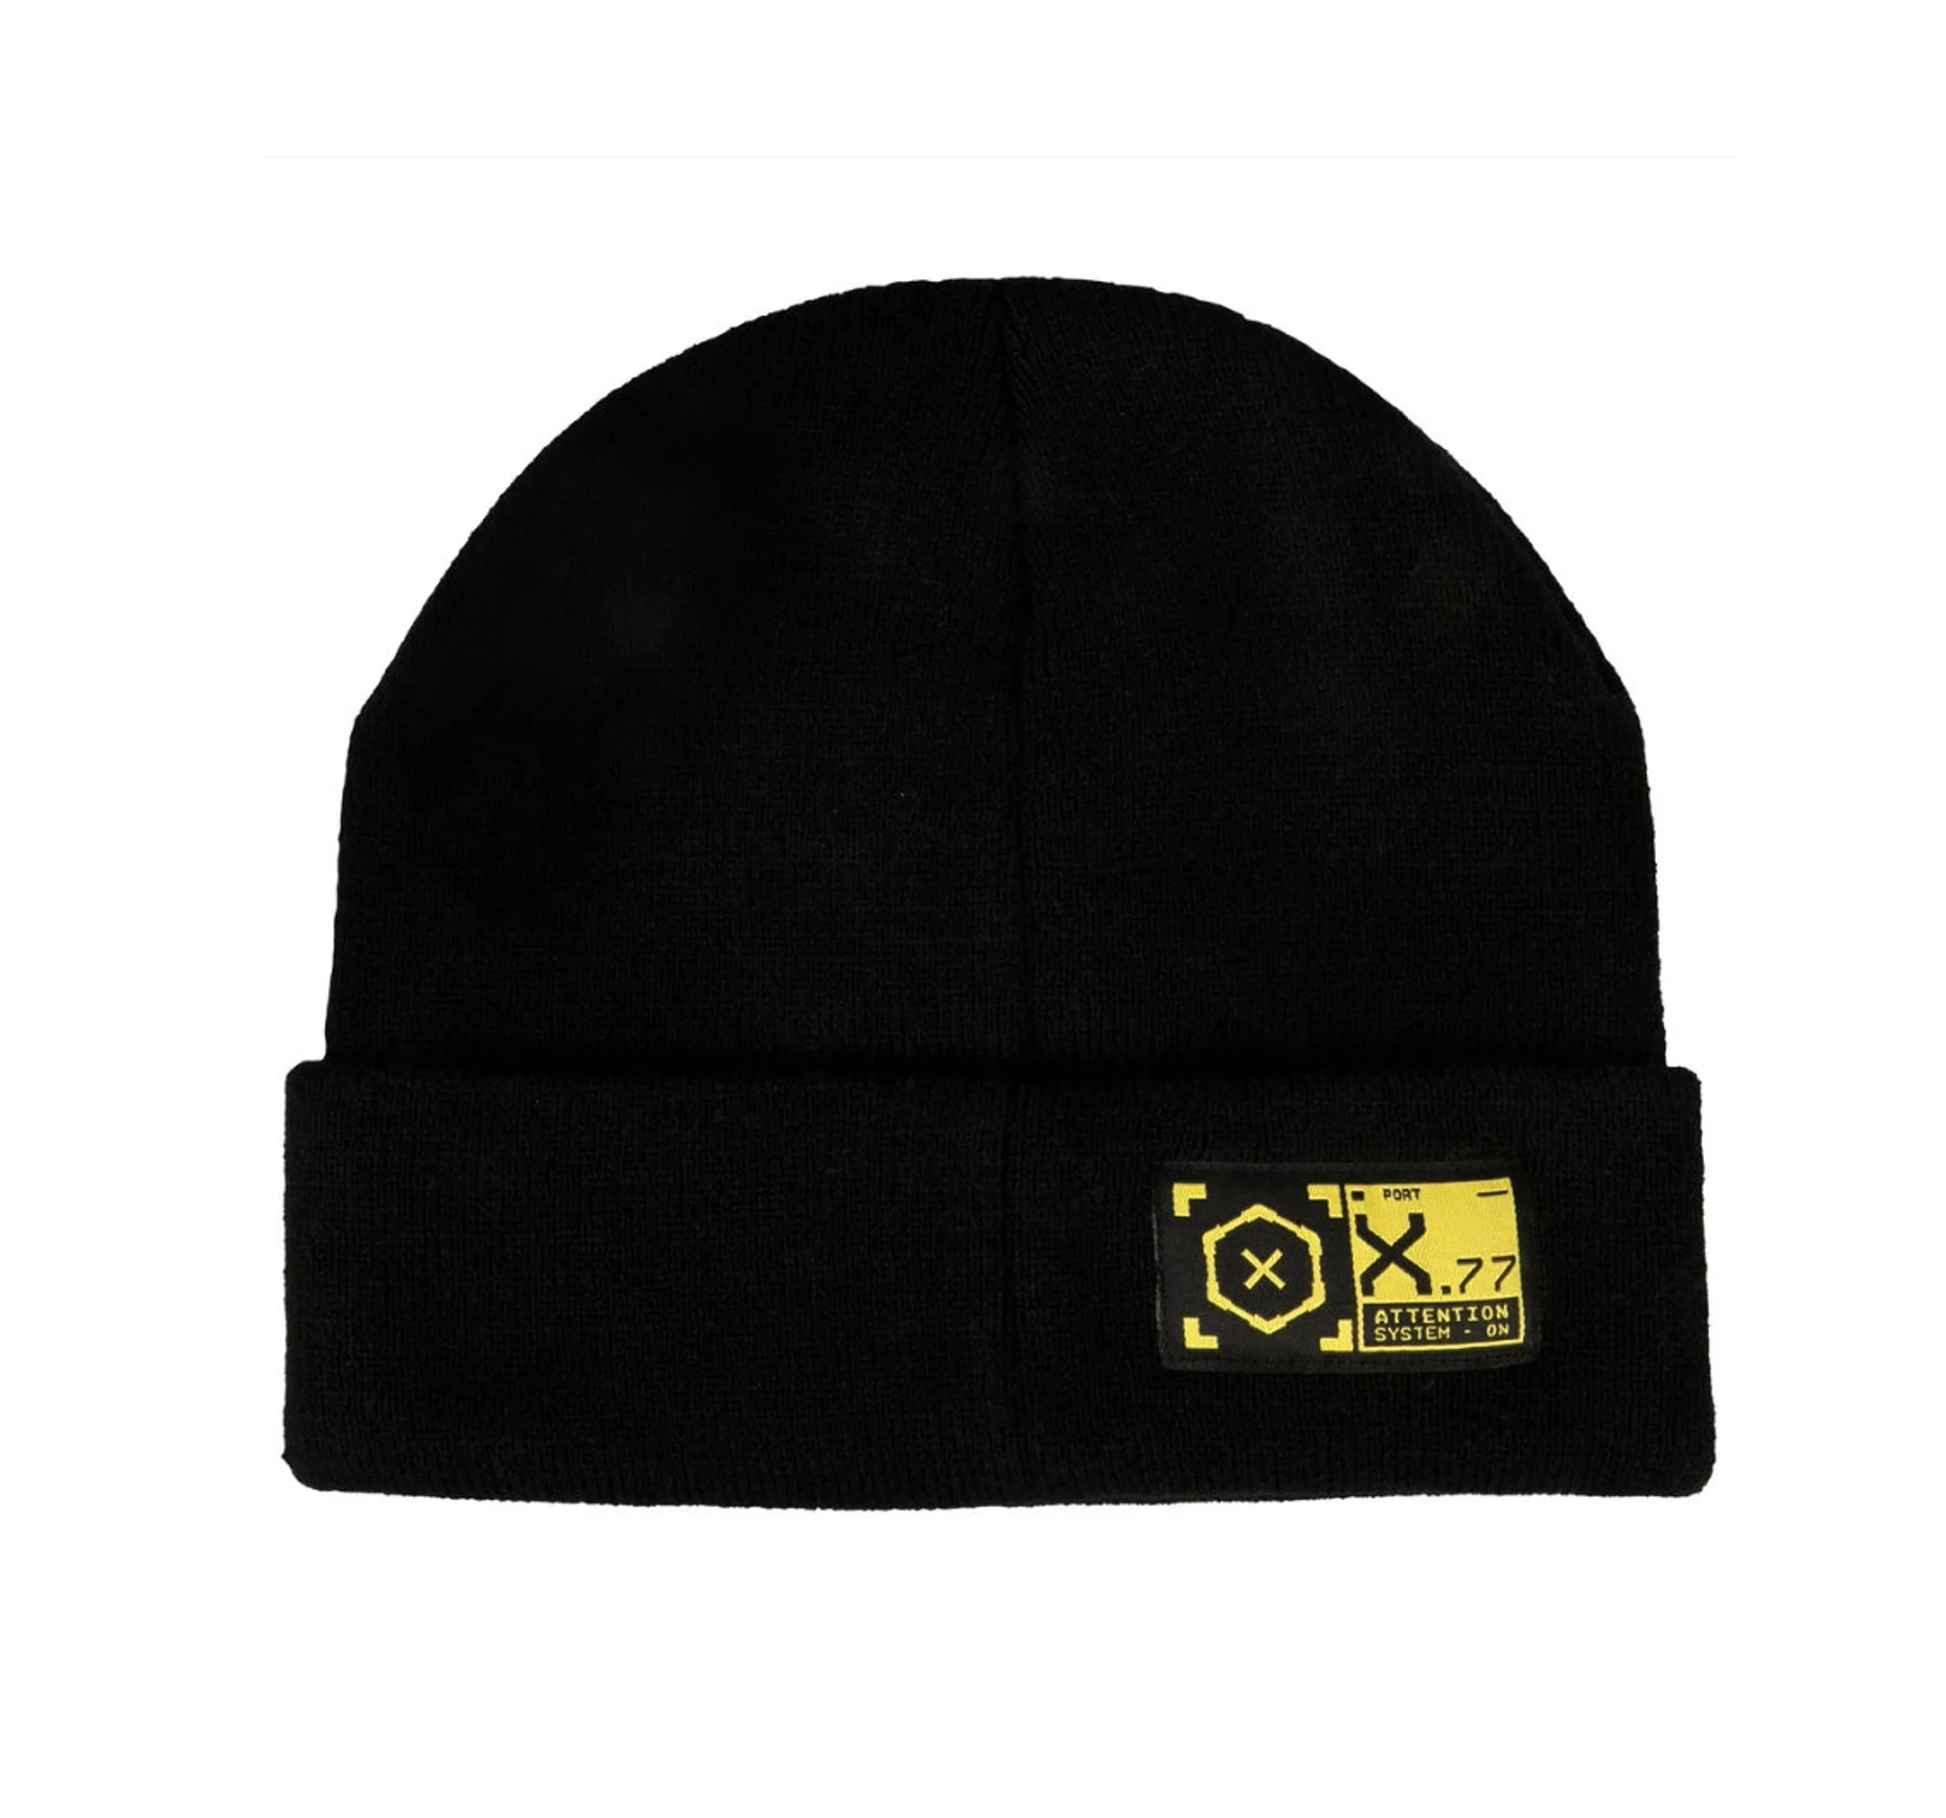 Black Beanie hat with knit cuff and a beautiful yellow embroidered Cyberpunk 2077 Logo on the front and Xport gear logo on the back